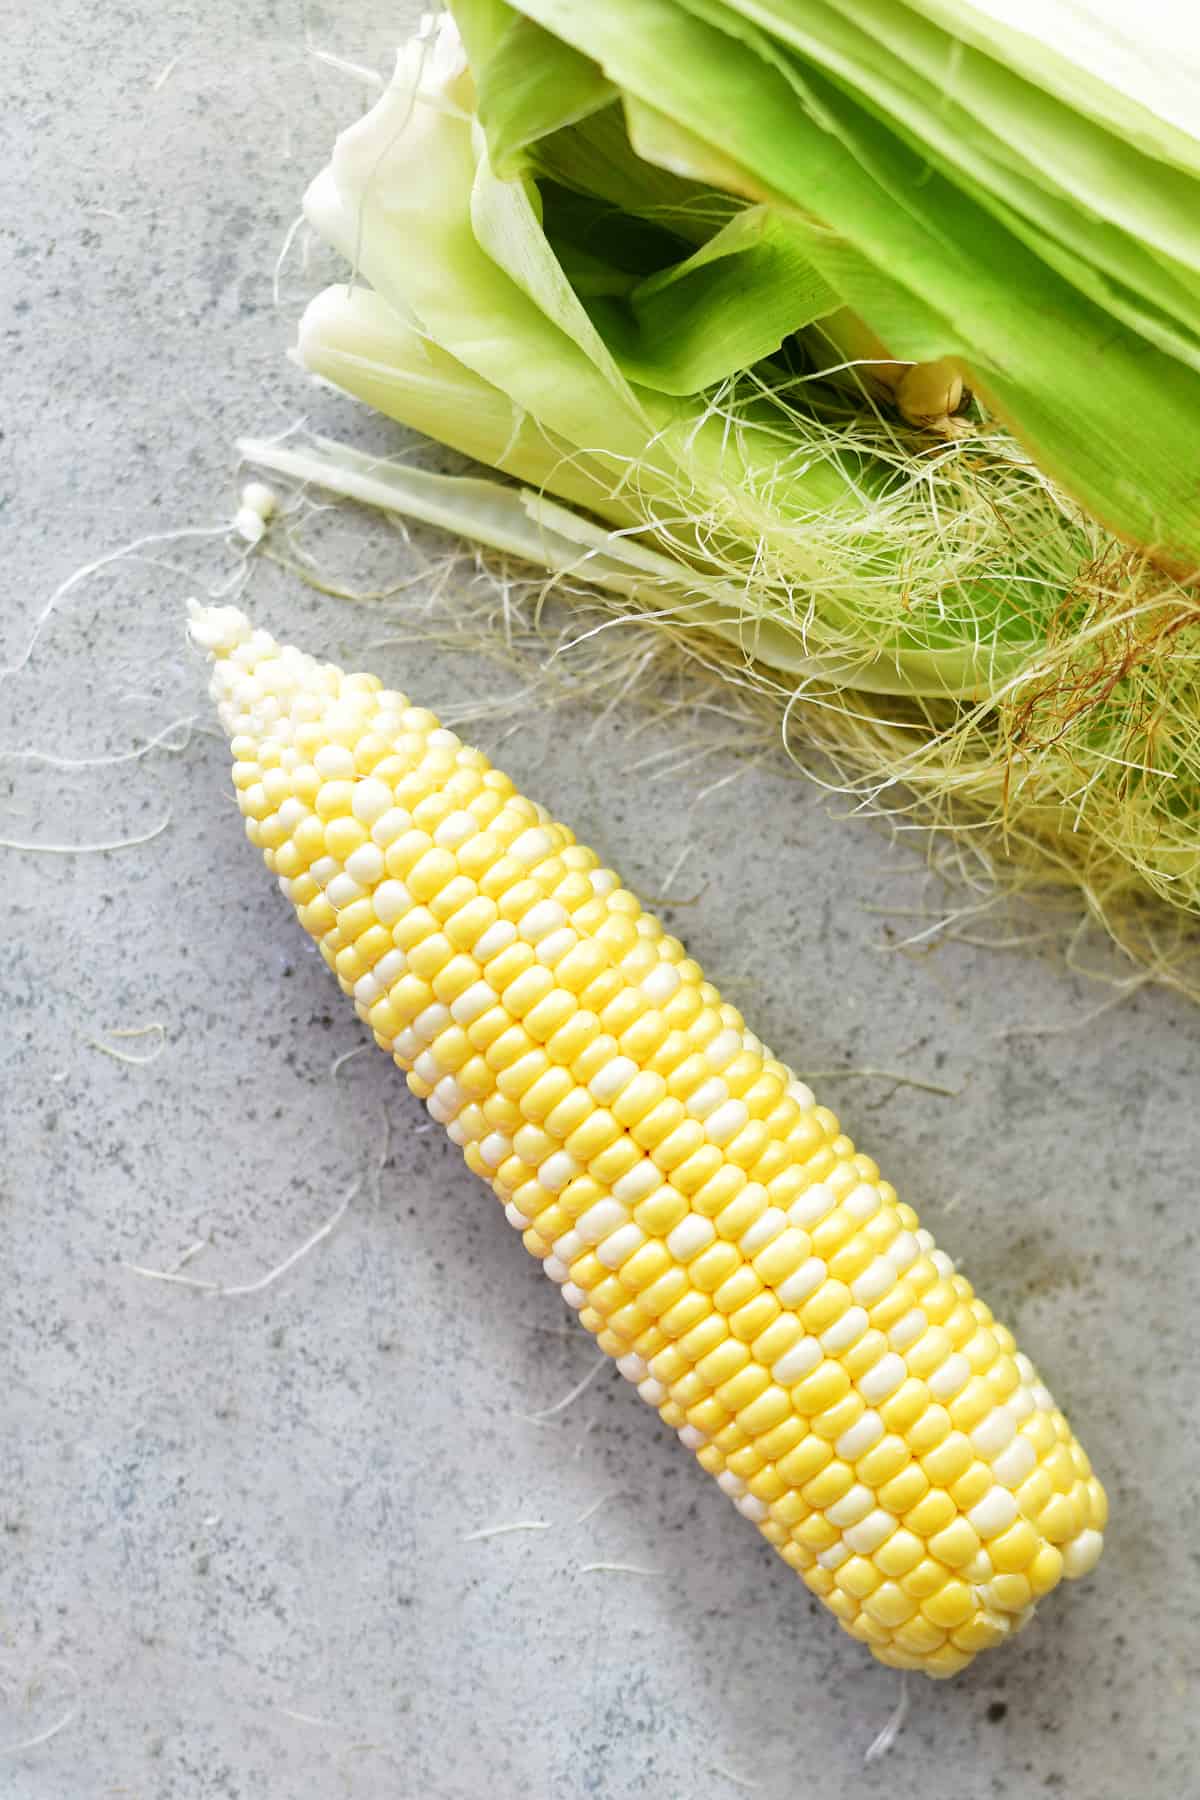 peeled corn on the cob for wrapping in foil and roasting in the oven